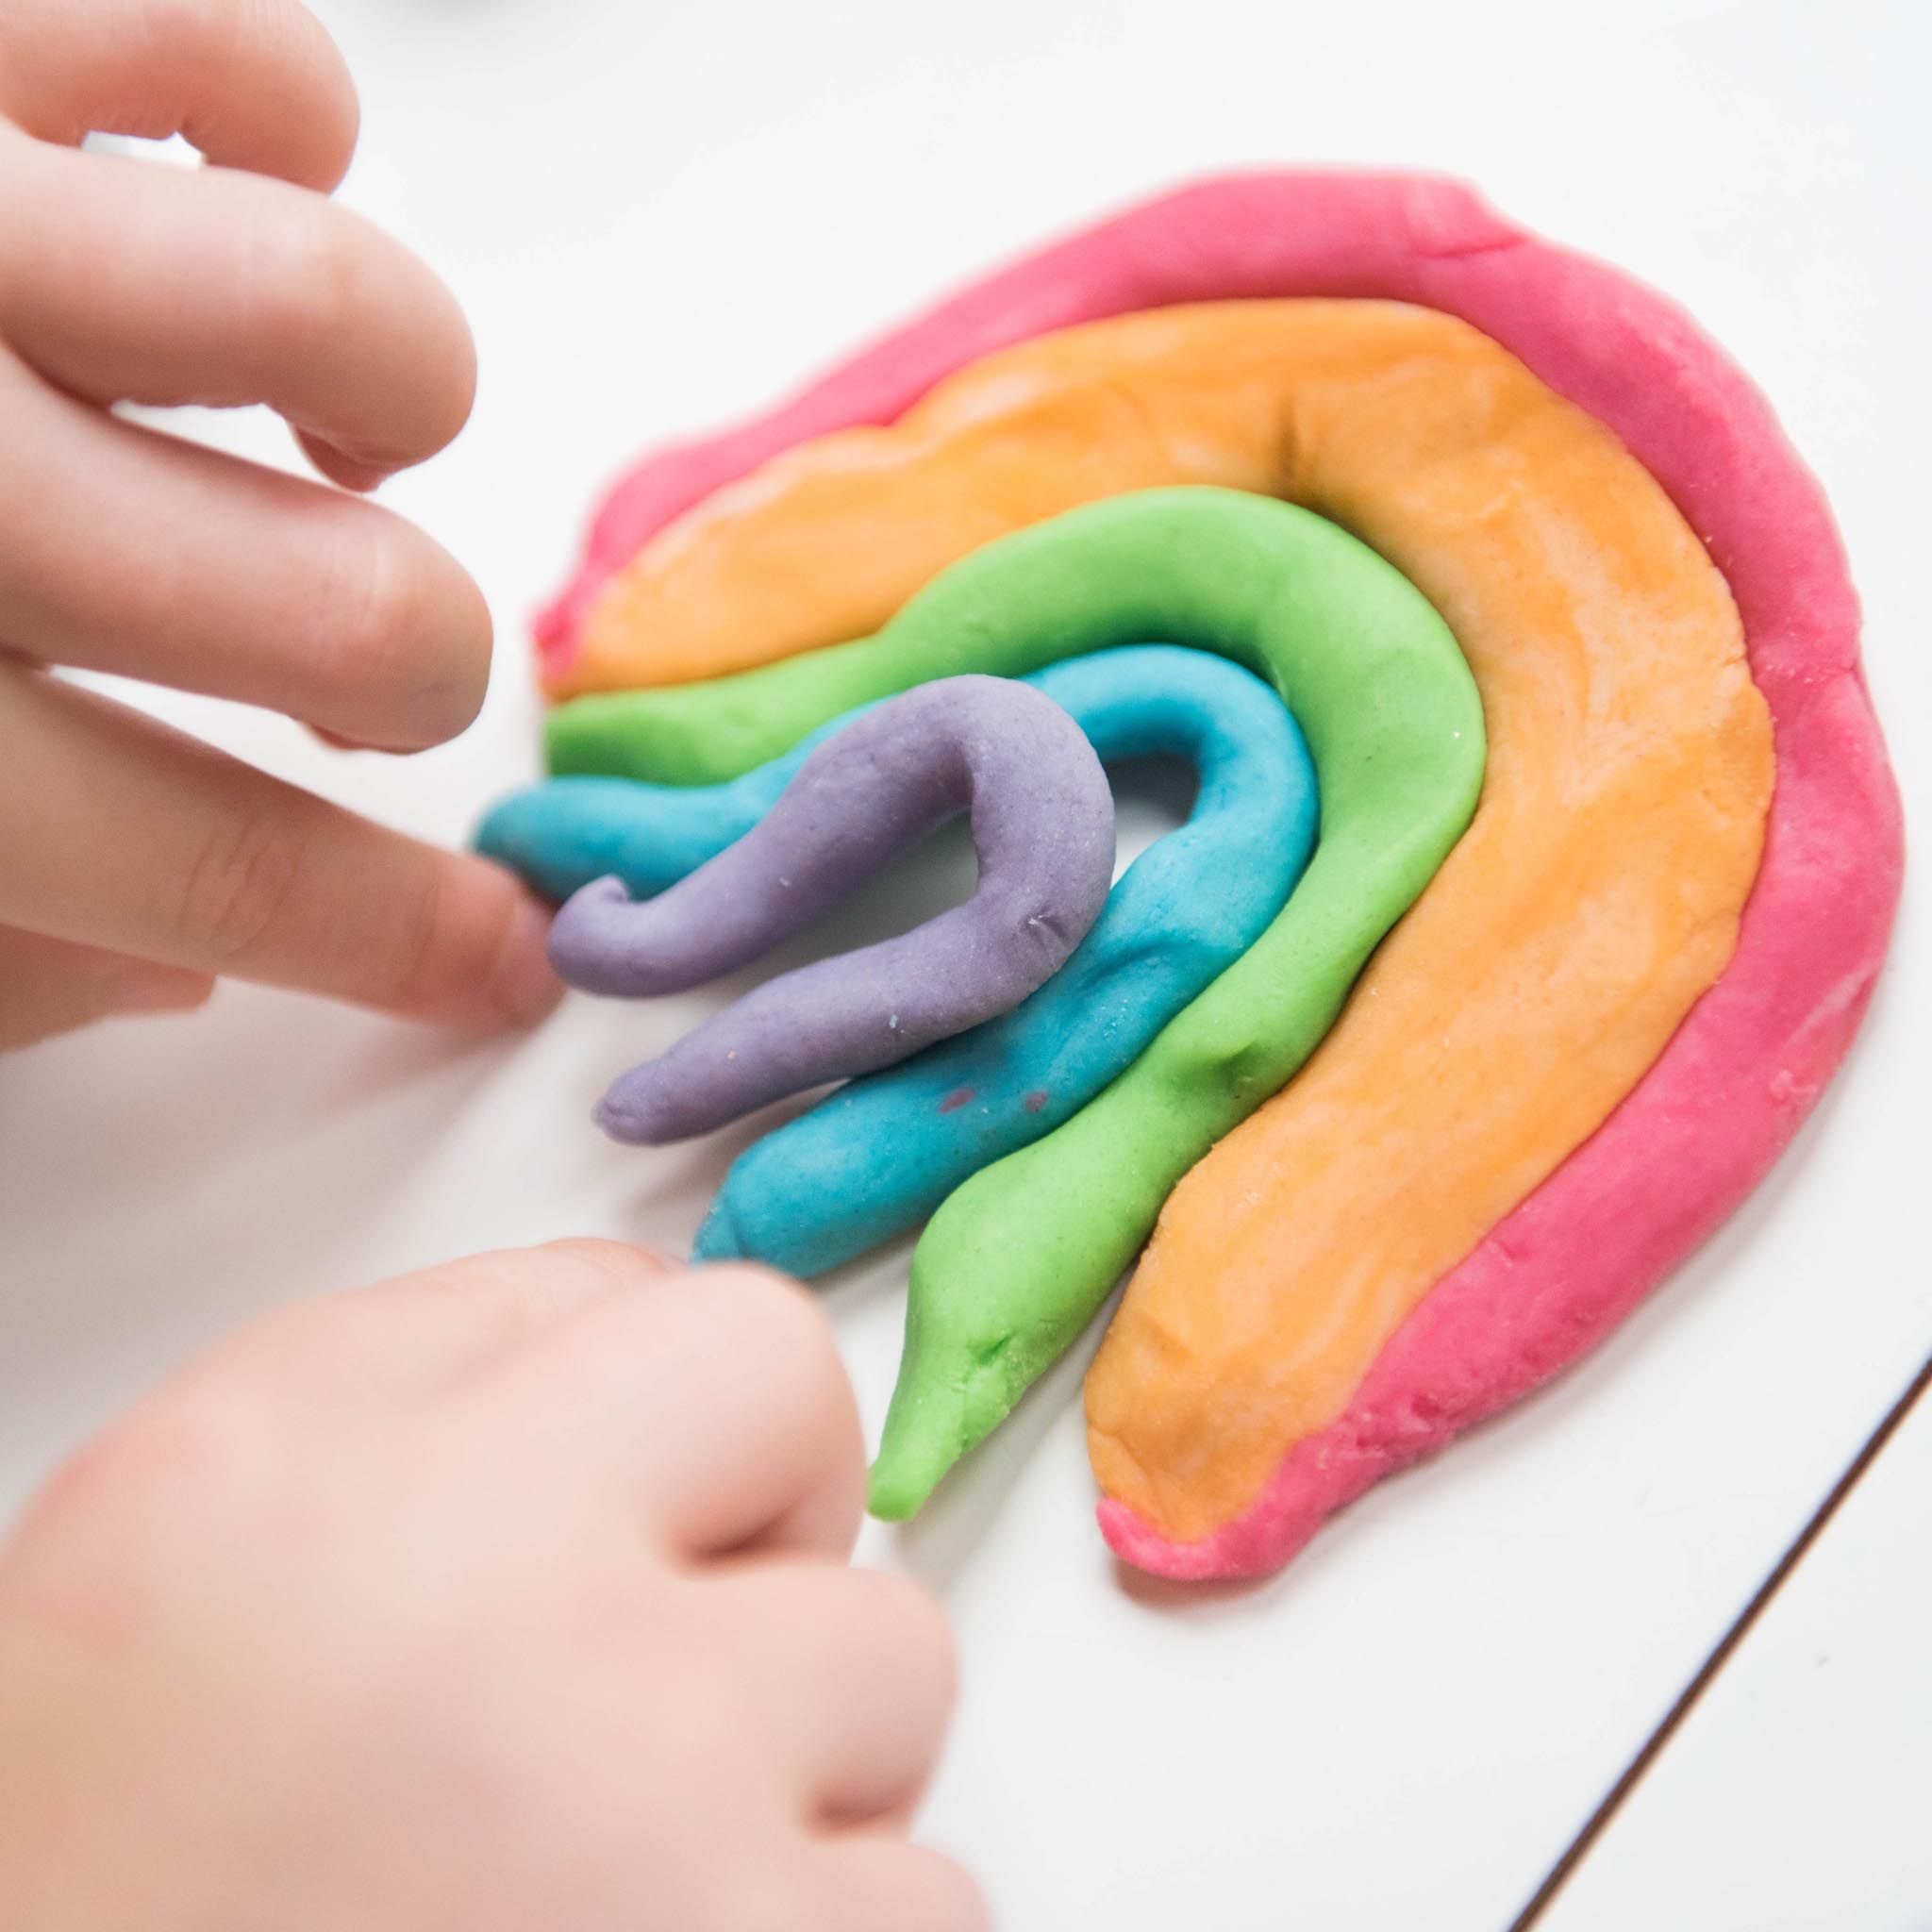 17 Simple Sensory Play Ideas for Toddlers and Babies